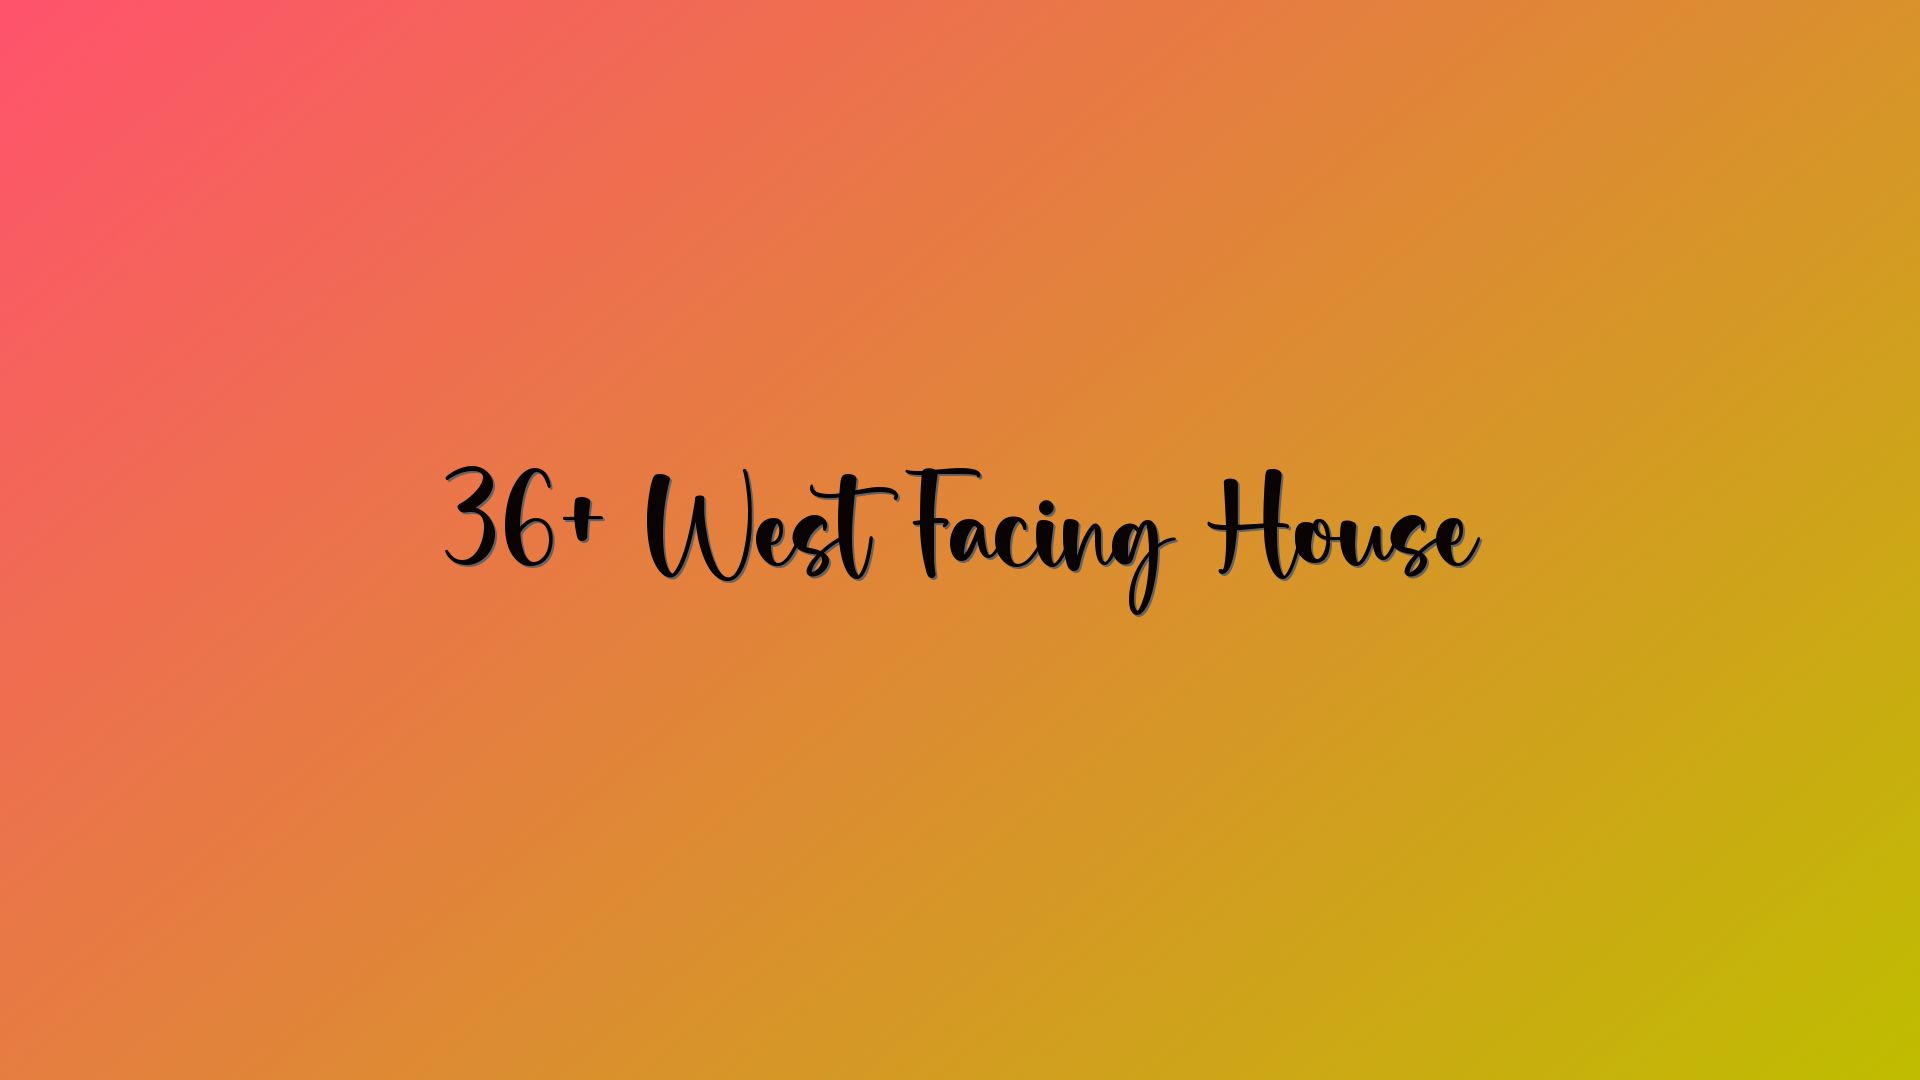 36+ West Facing House